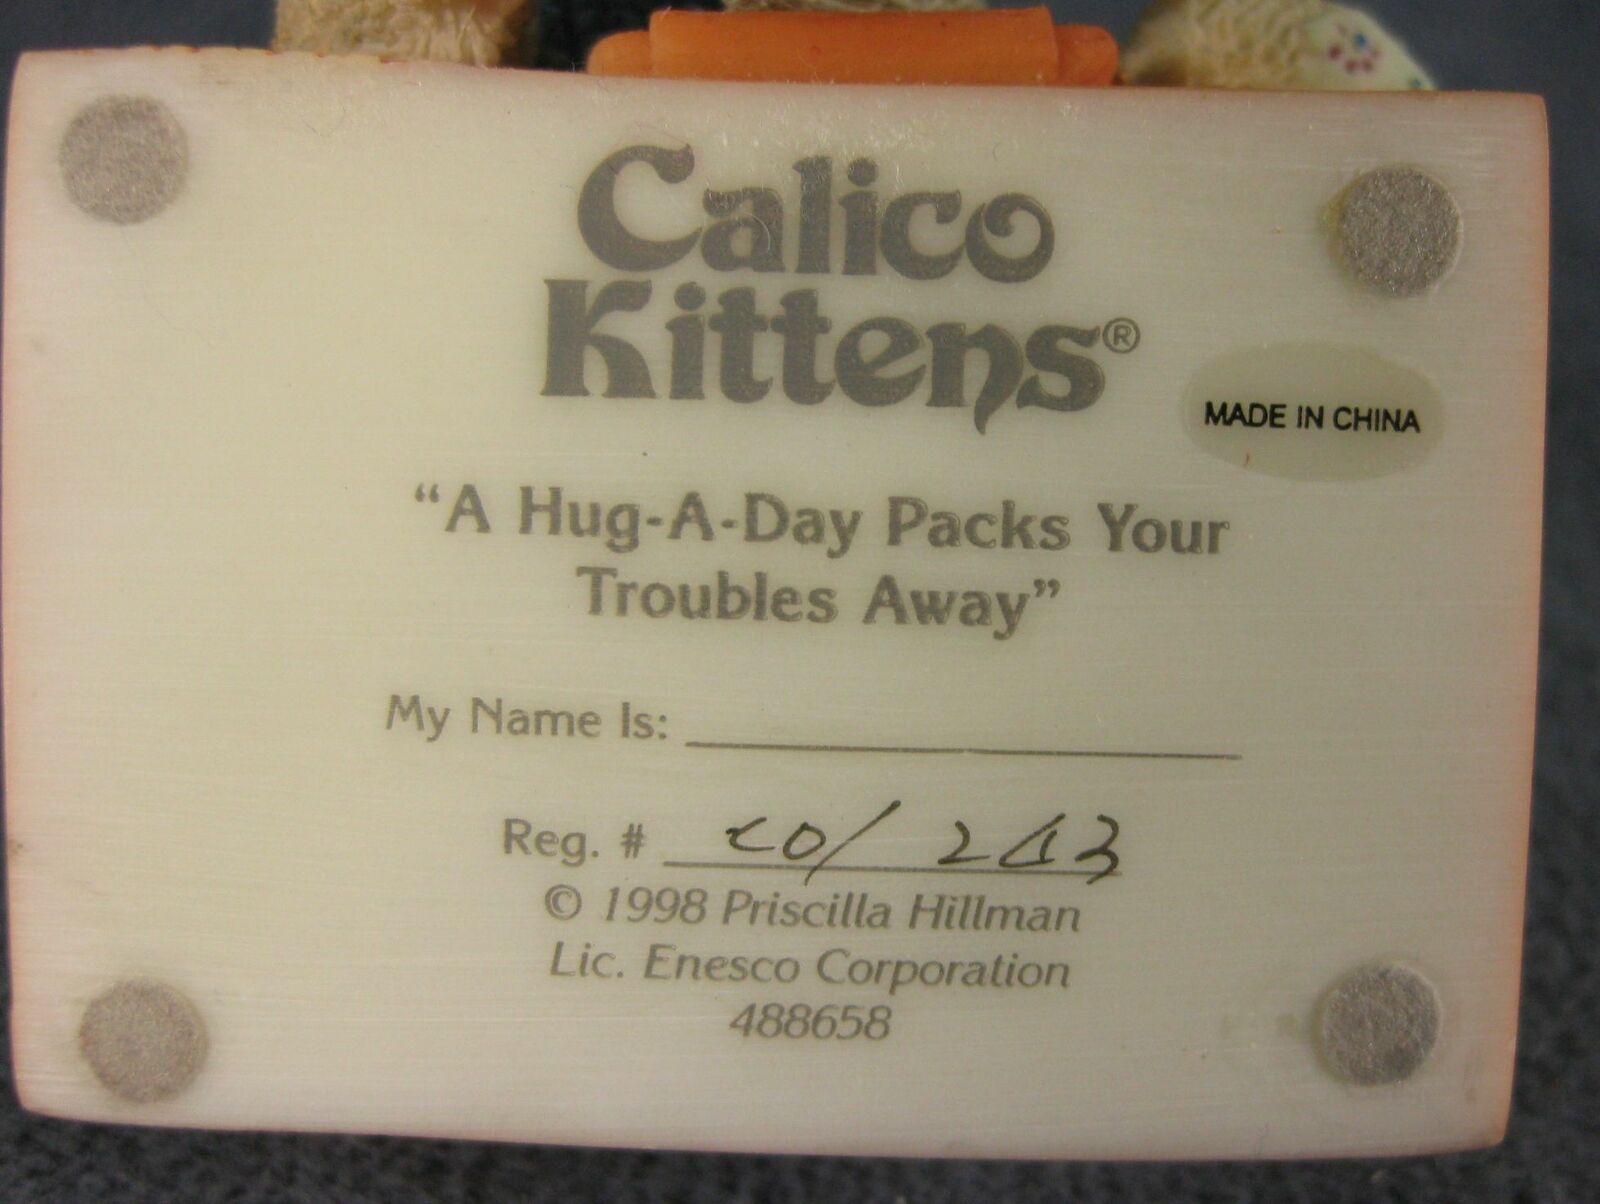 CALICO KITTENS BY PRISCILLA HILLMAN A HUG A DAY PACKS YOUR TROUBLES AWAY